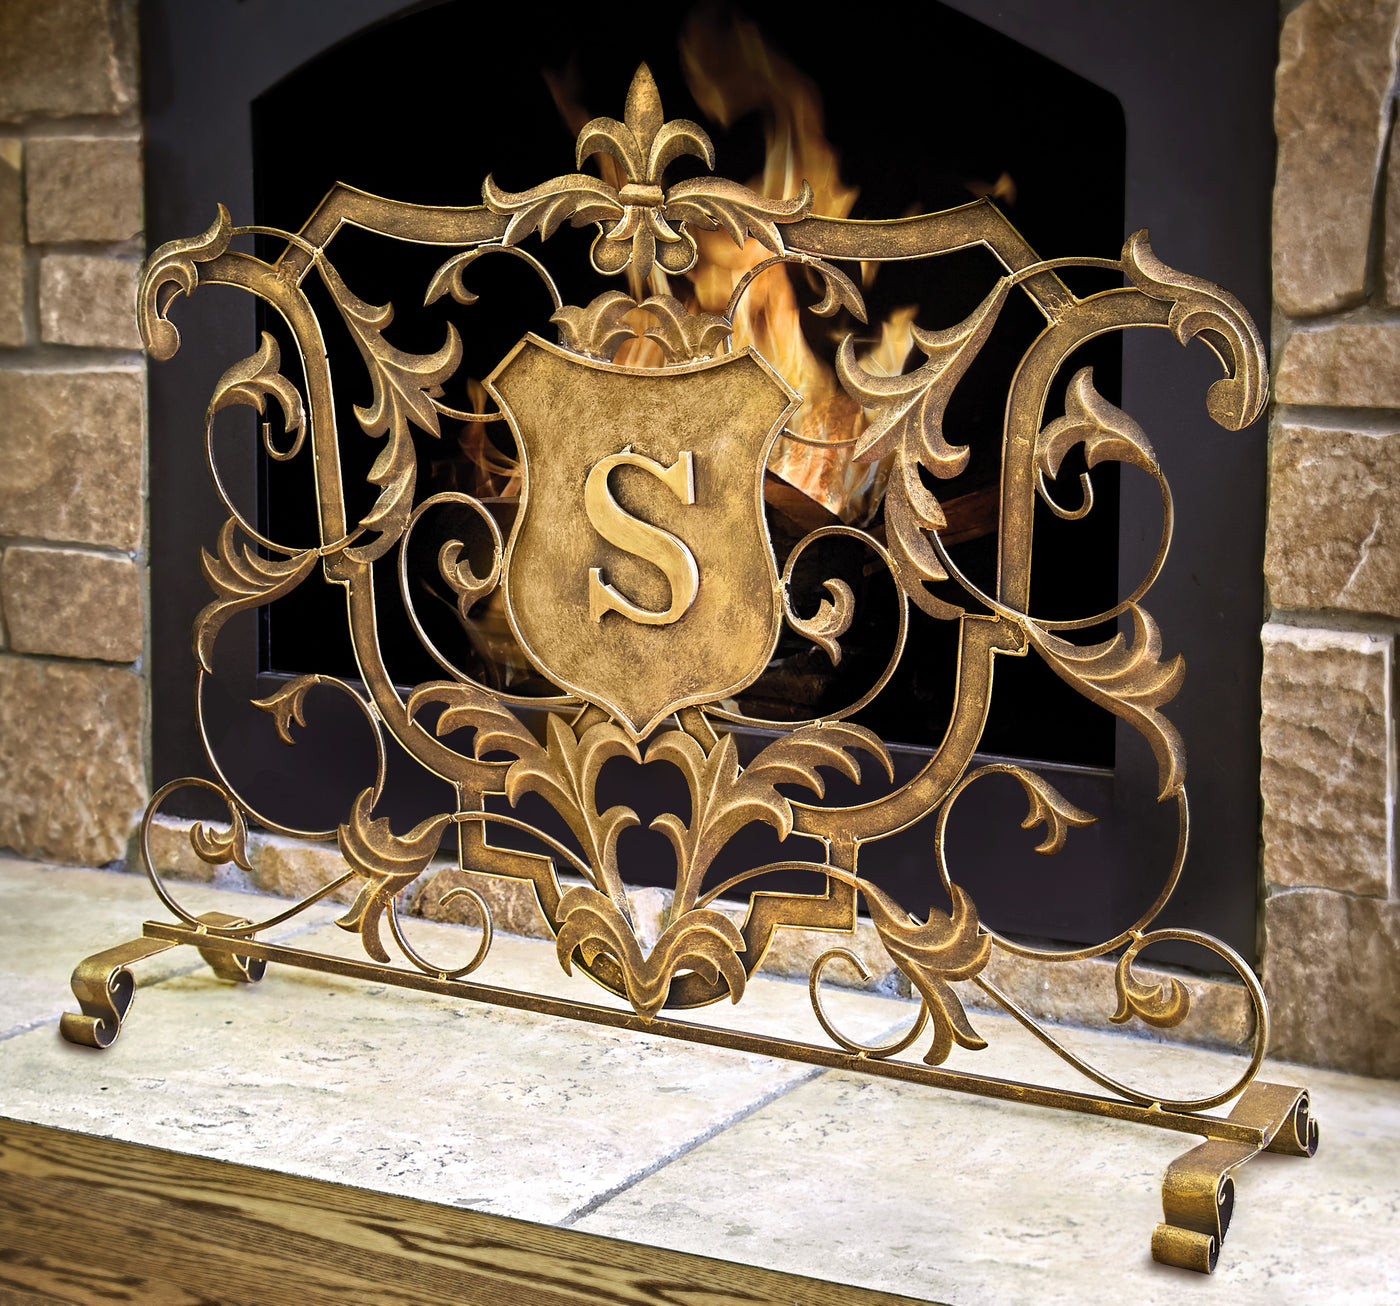 Burnished Gold Fire Screen with Monogram